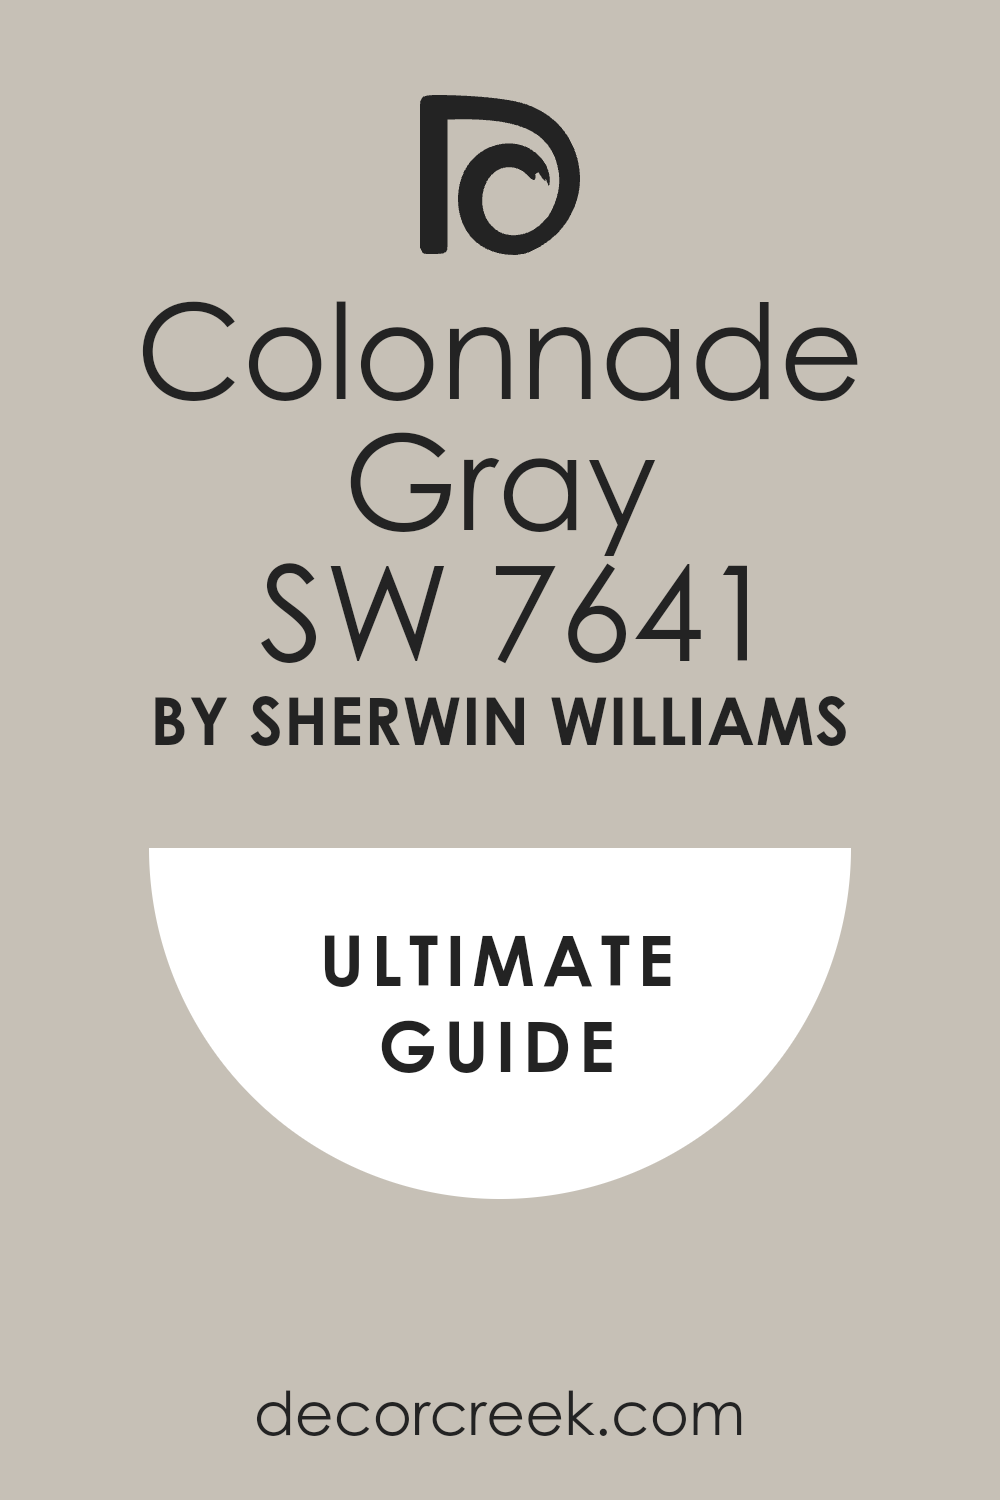 colonnade_gray_sw_7641_paint_color_by_sherwin_williams_ultimate_guide